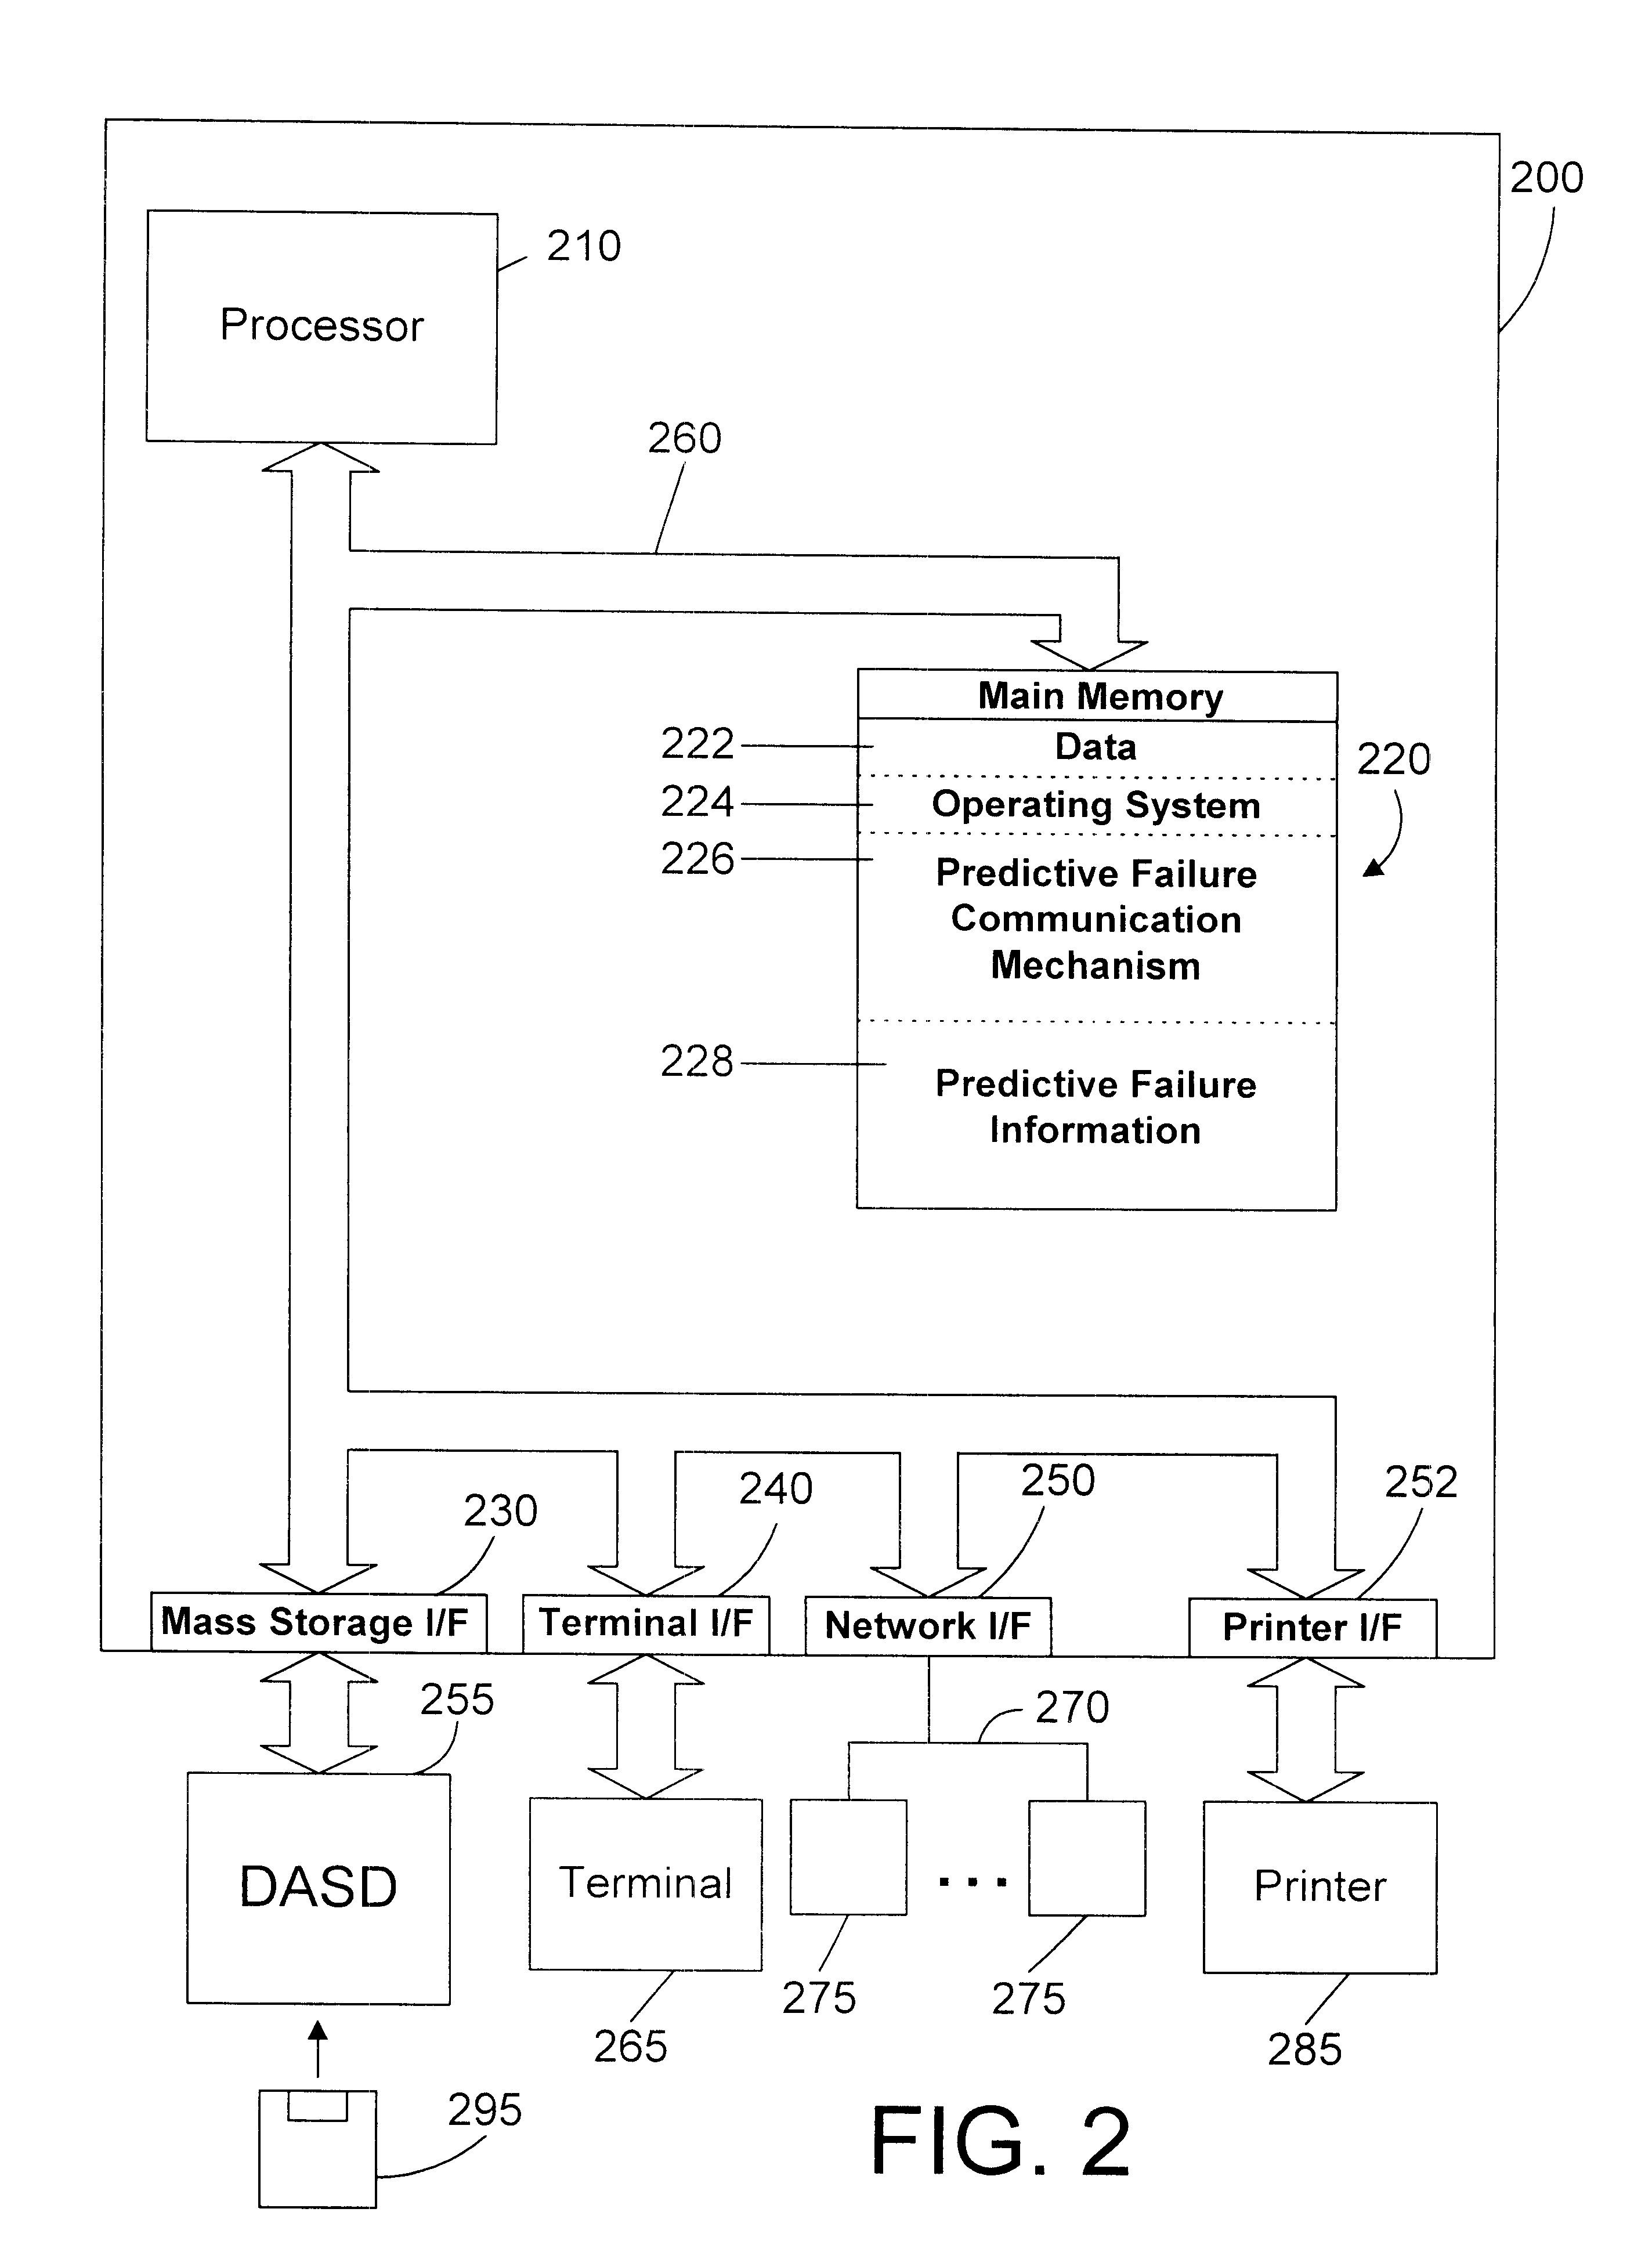 Apparatus and method for sharing predictive failure information on a computer network